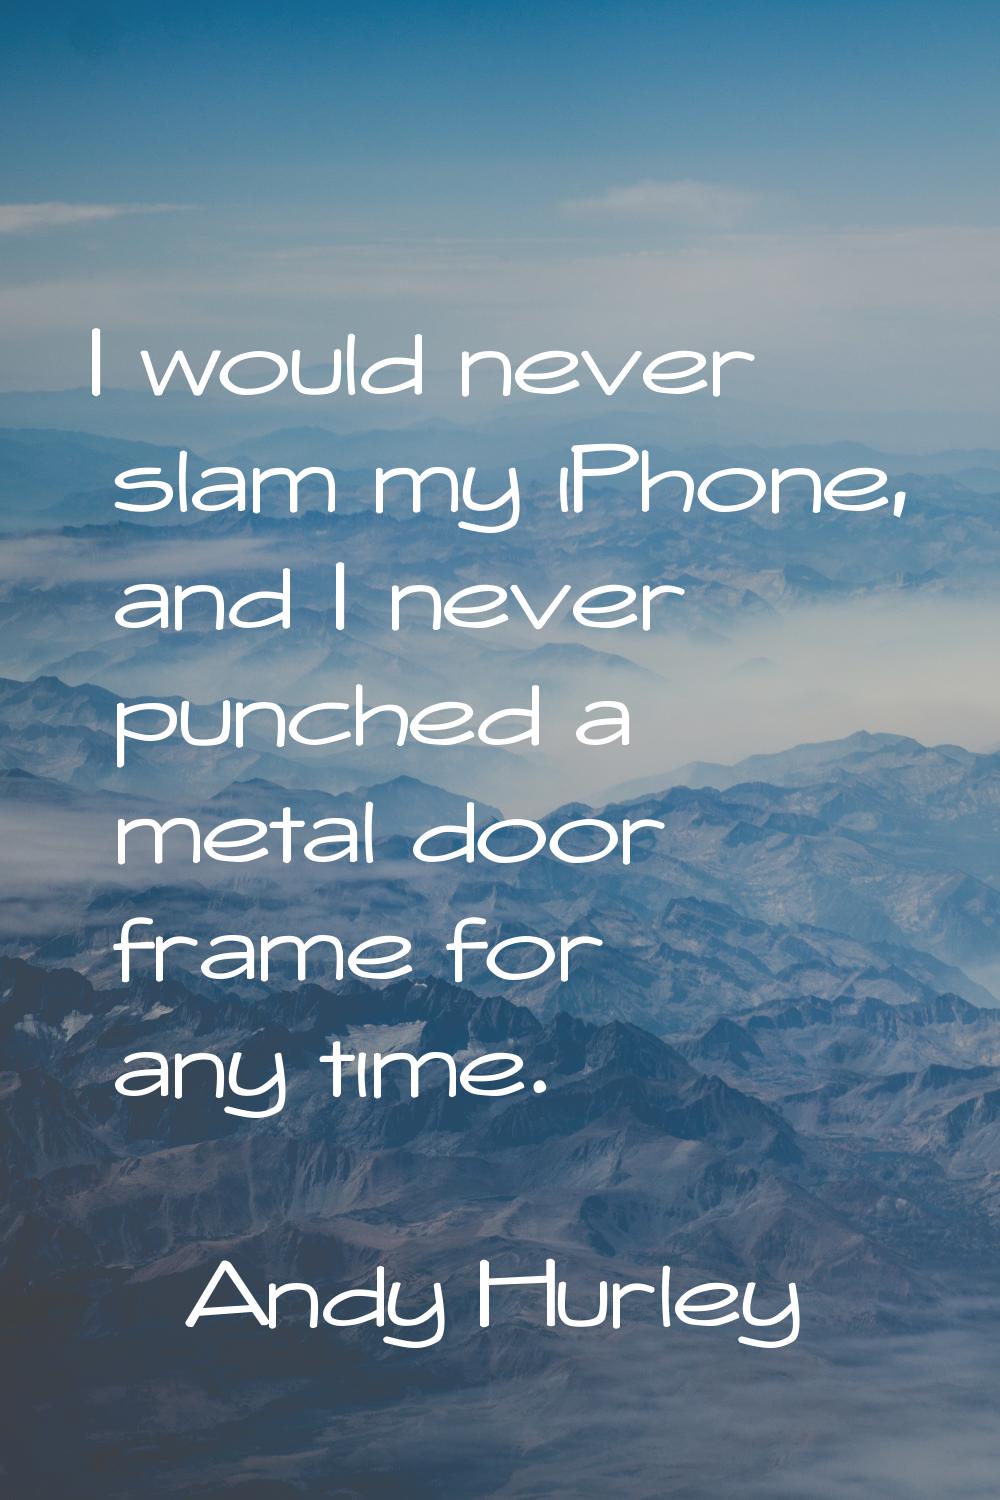 I would never slam my iPhone, and I never punched a metal door frame for any time.